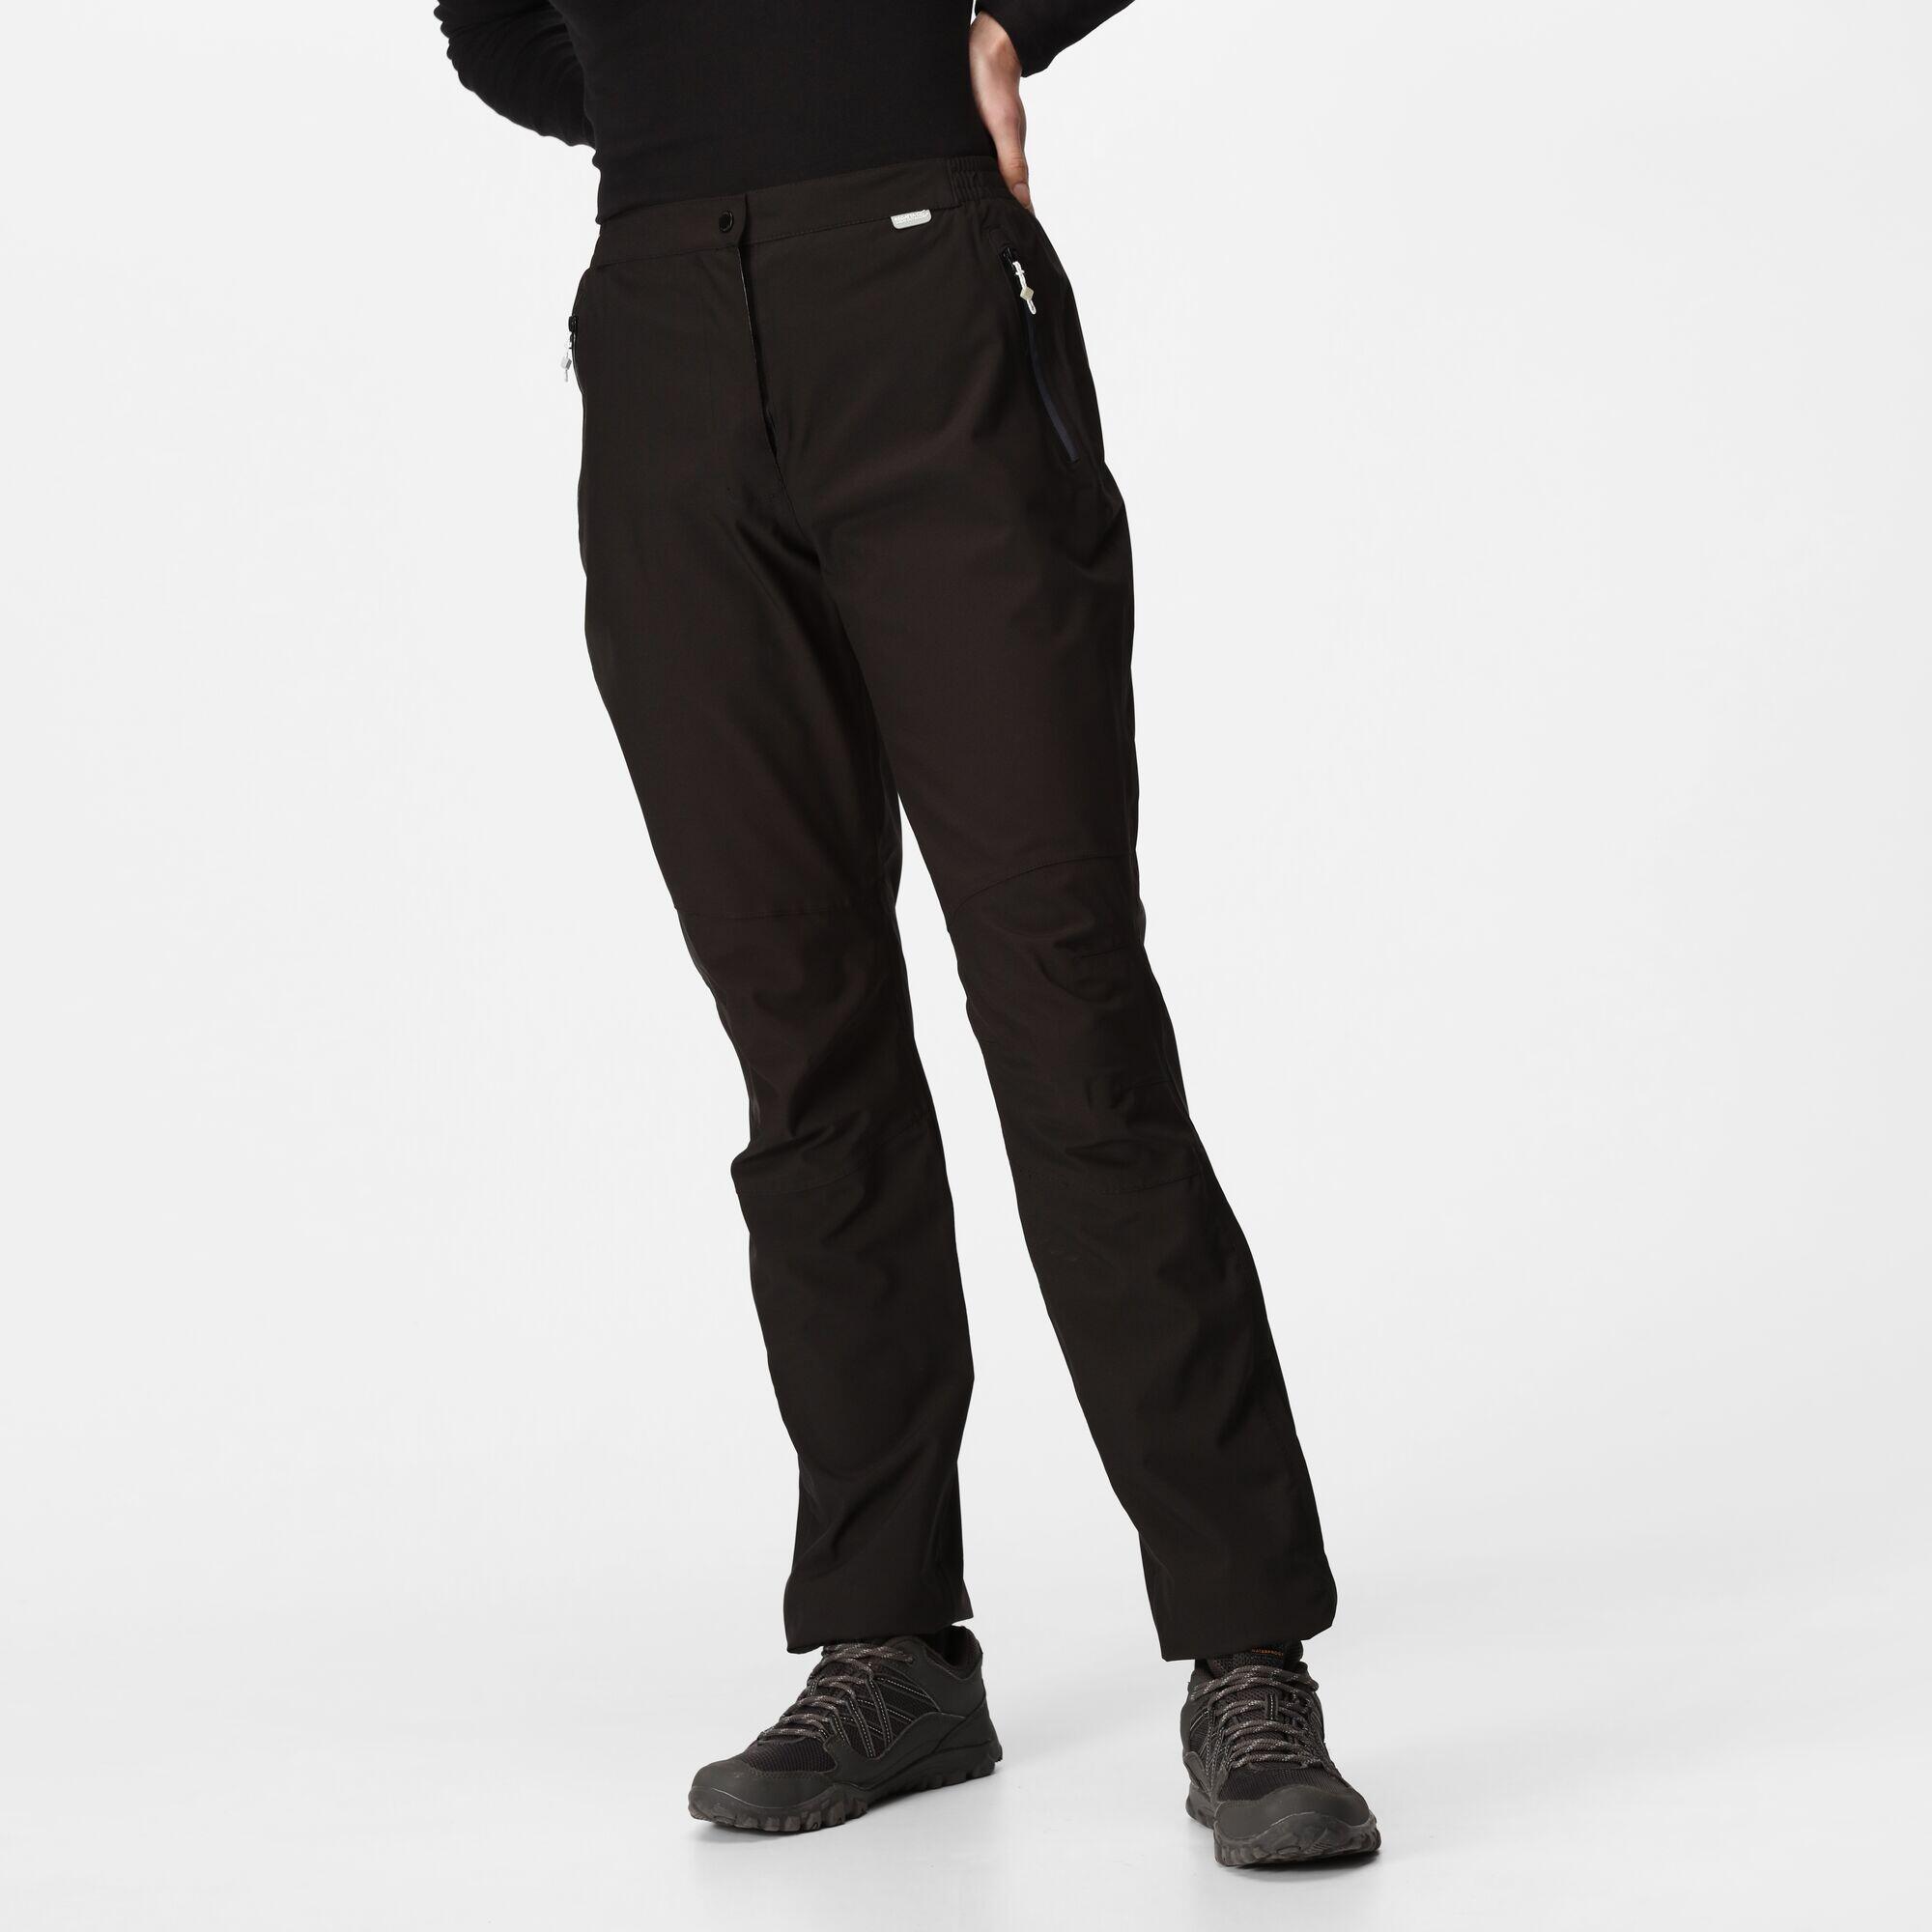 Highton Stretch Women's Hiking Overtrousers - Black 1/5